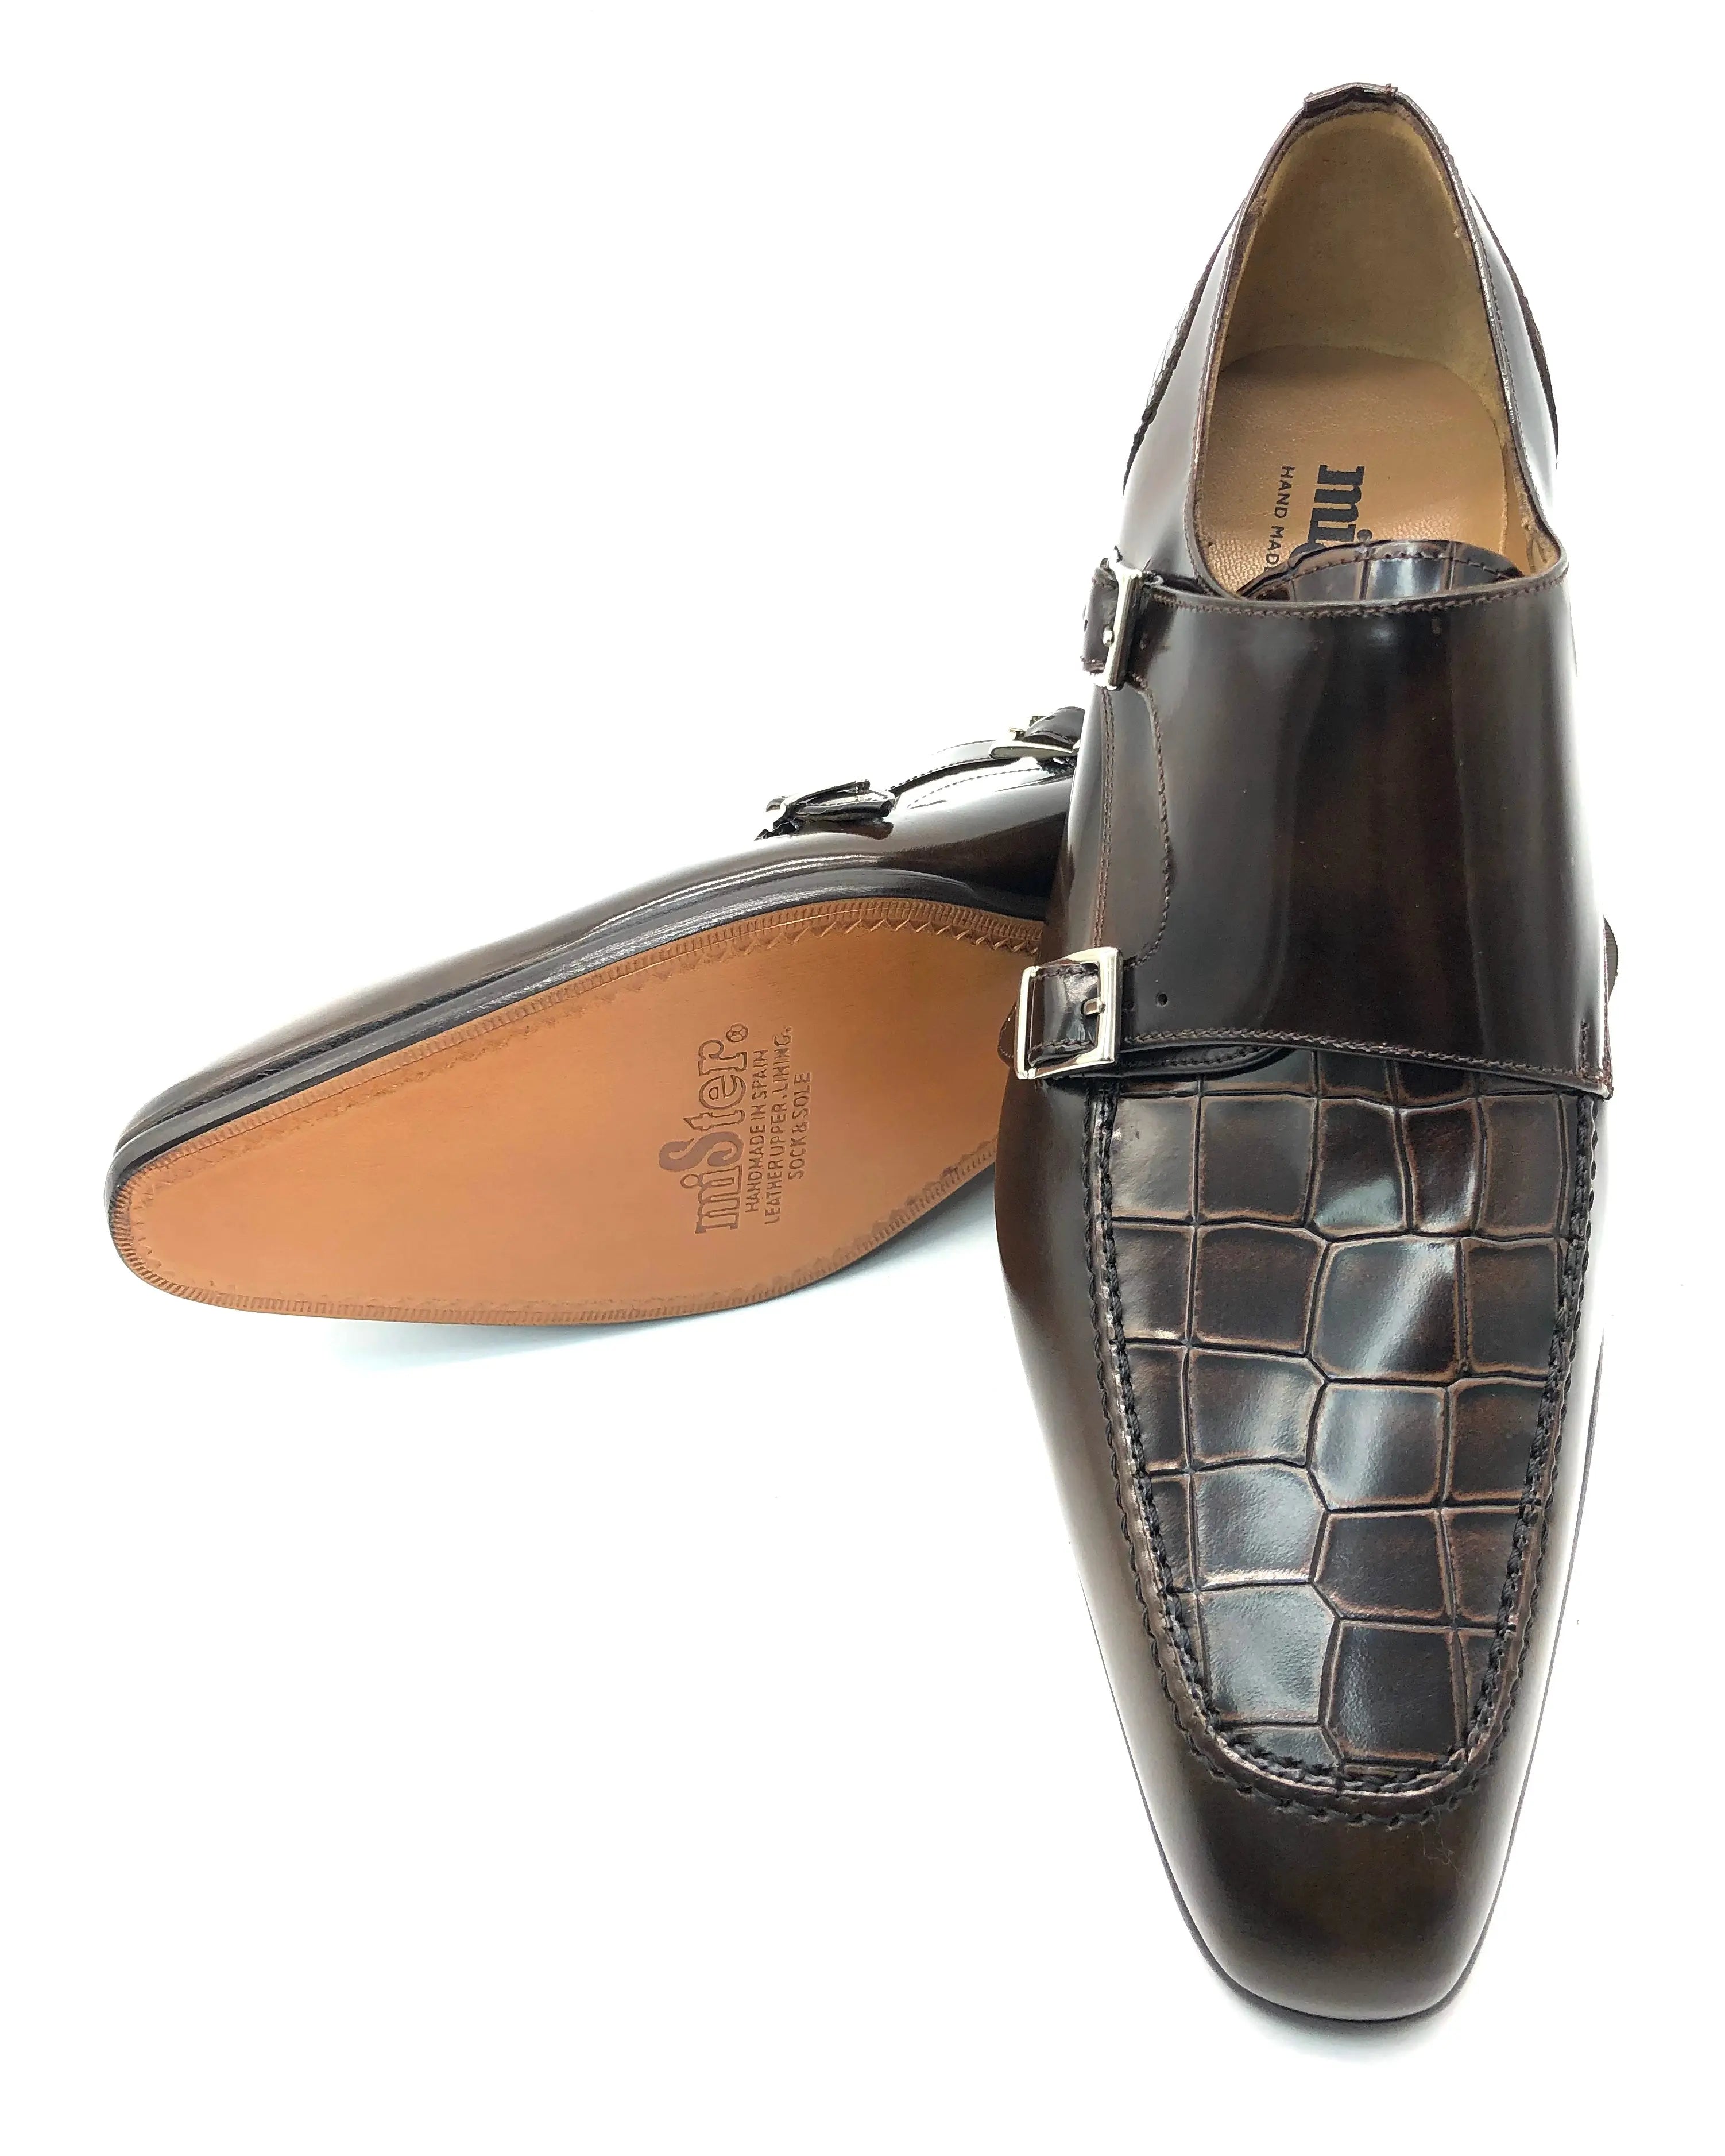 MISTER 37481 BROWN Loafers | familyshoecentre